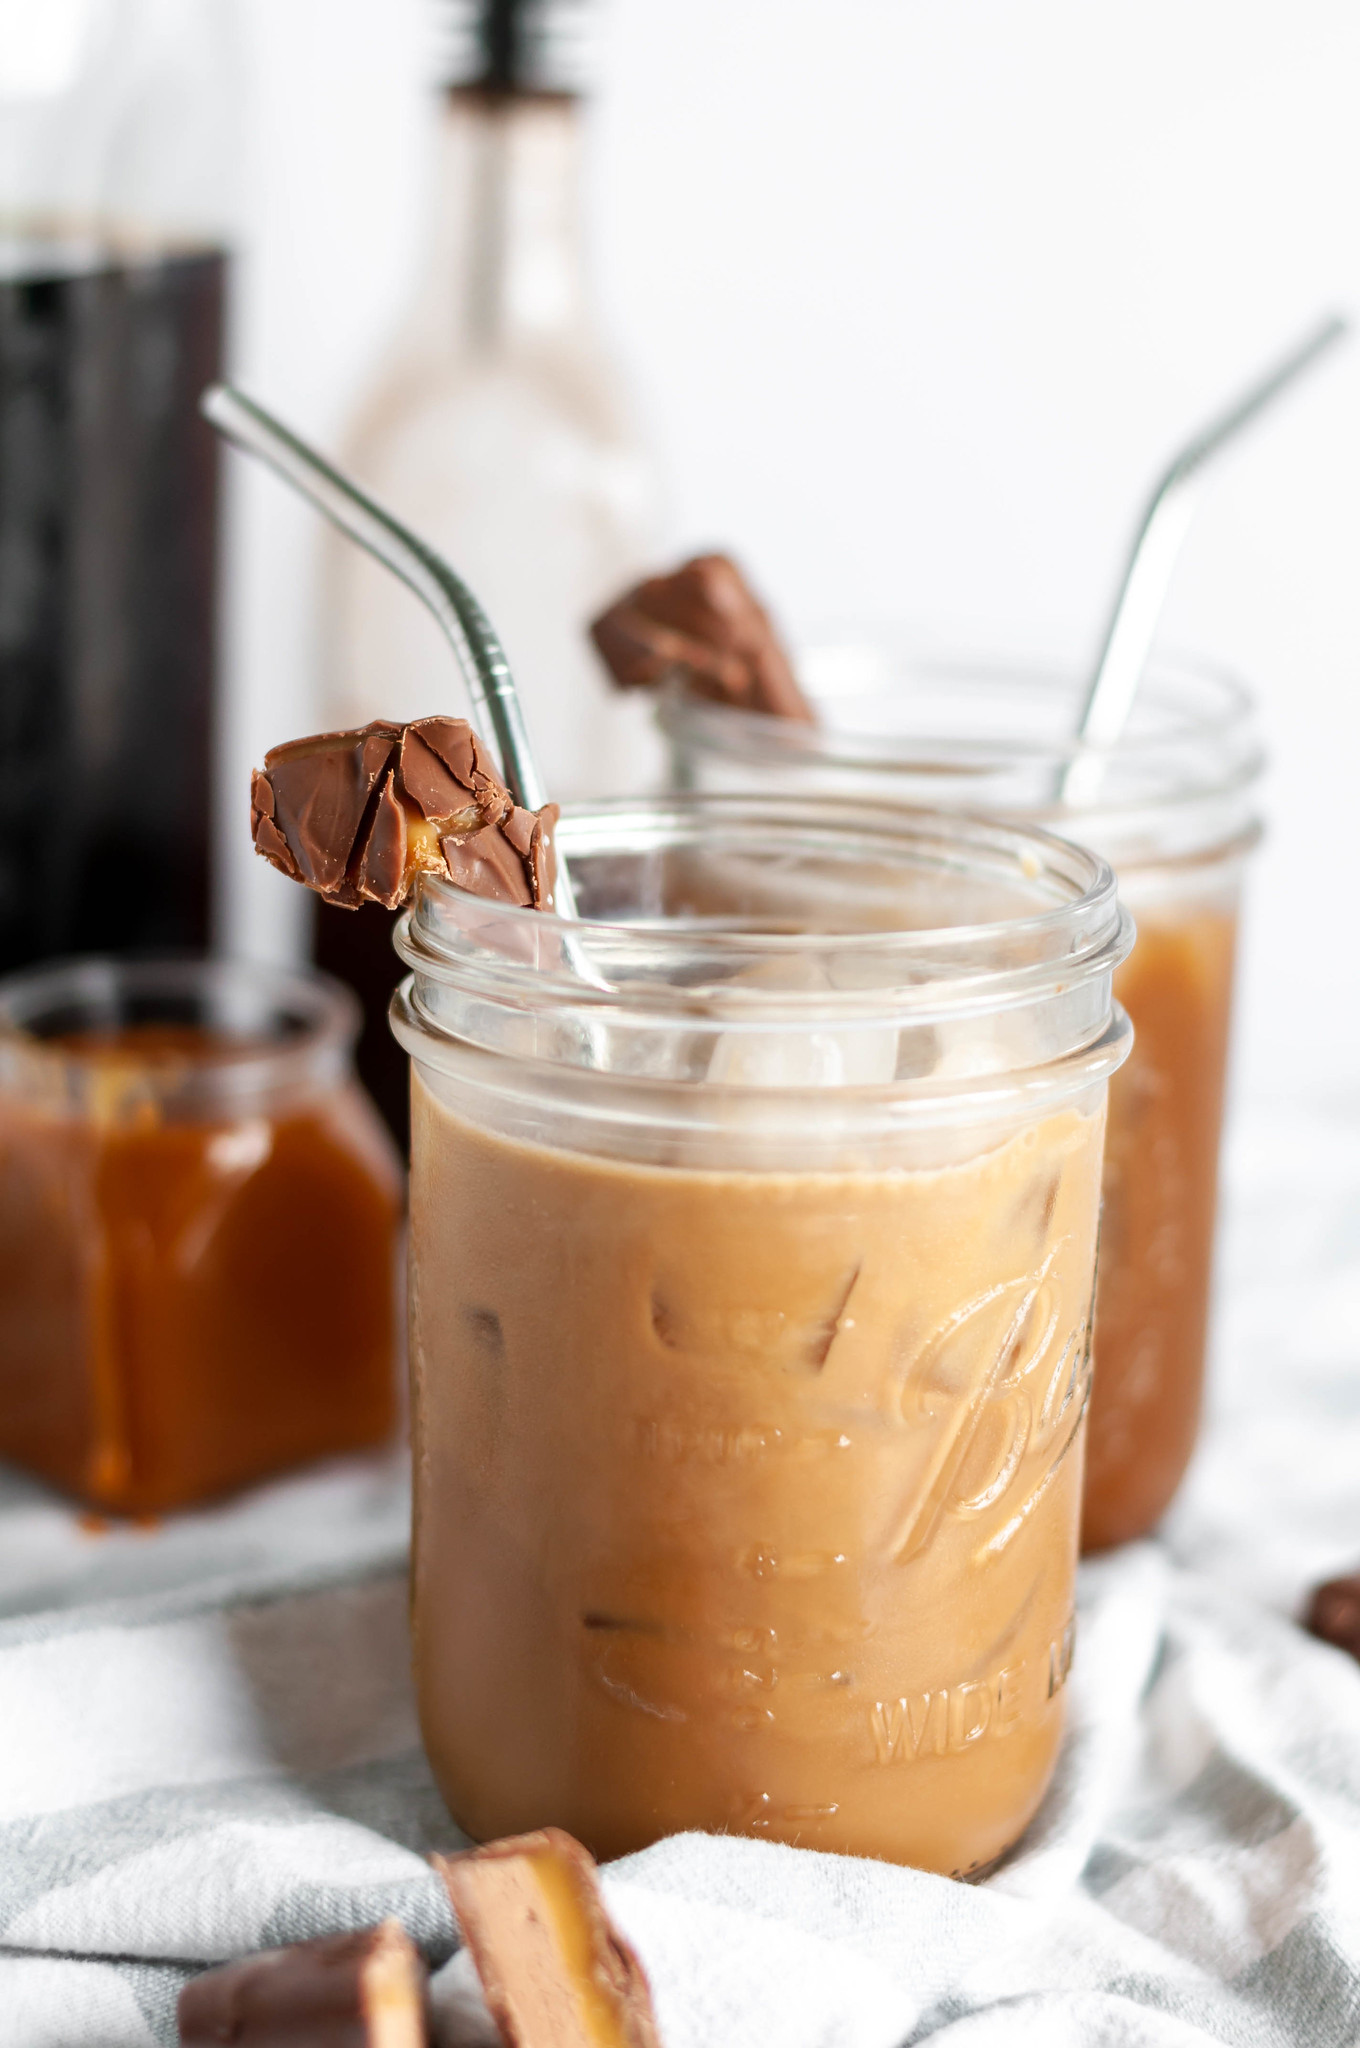 Milky Way Iced Coffee takes all the classic chocolate, caramel and malt flavors of the candy bar and turns it into the perfect way to start your morning.